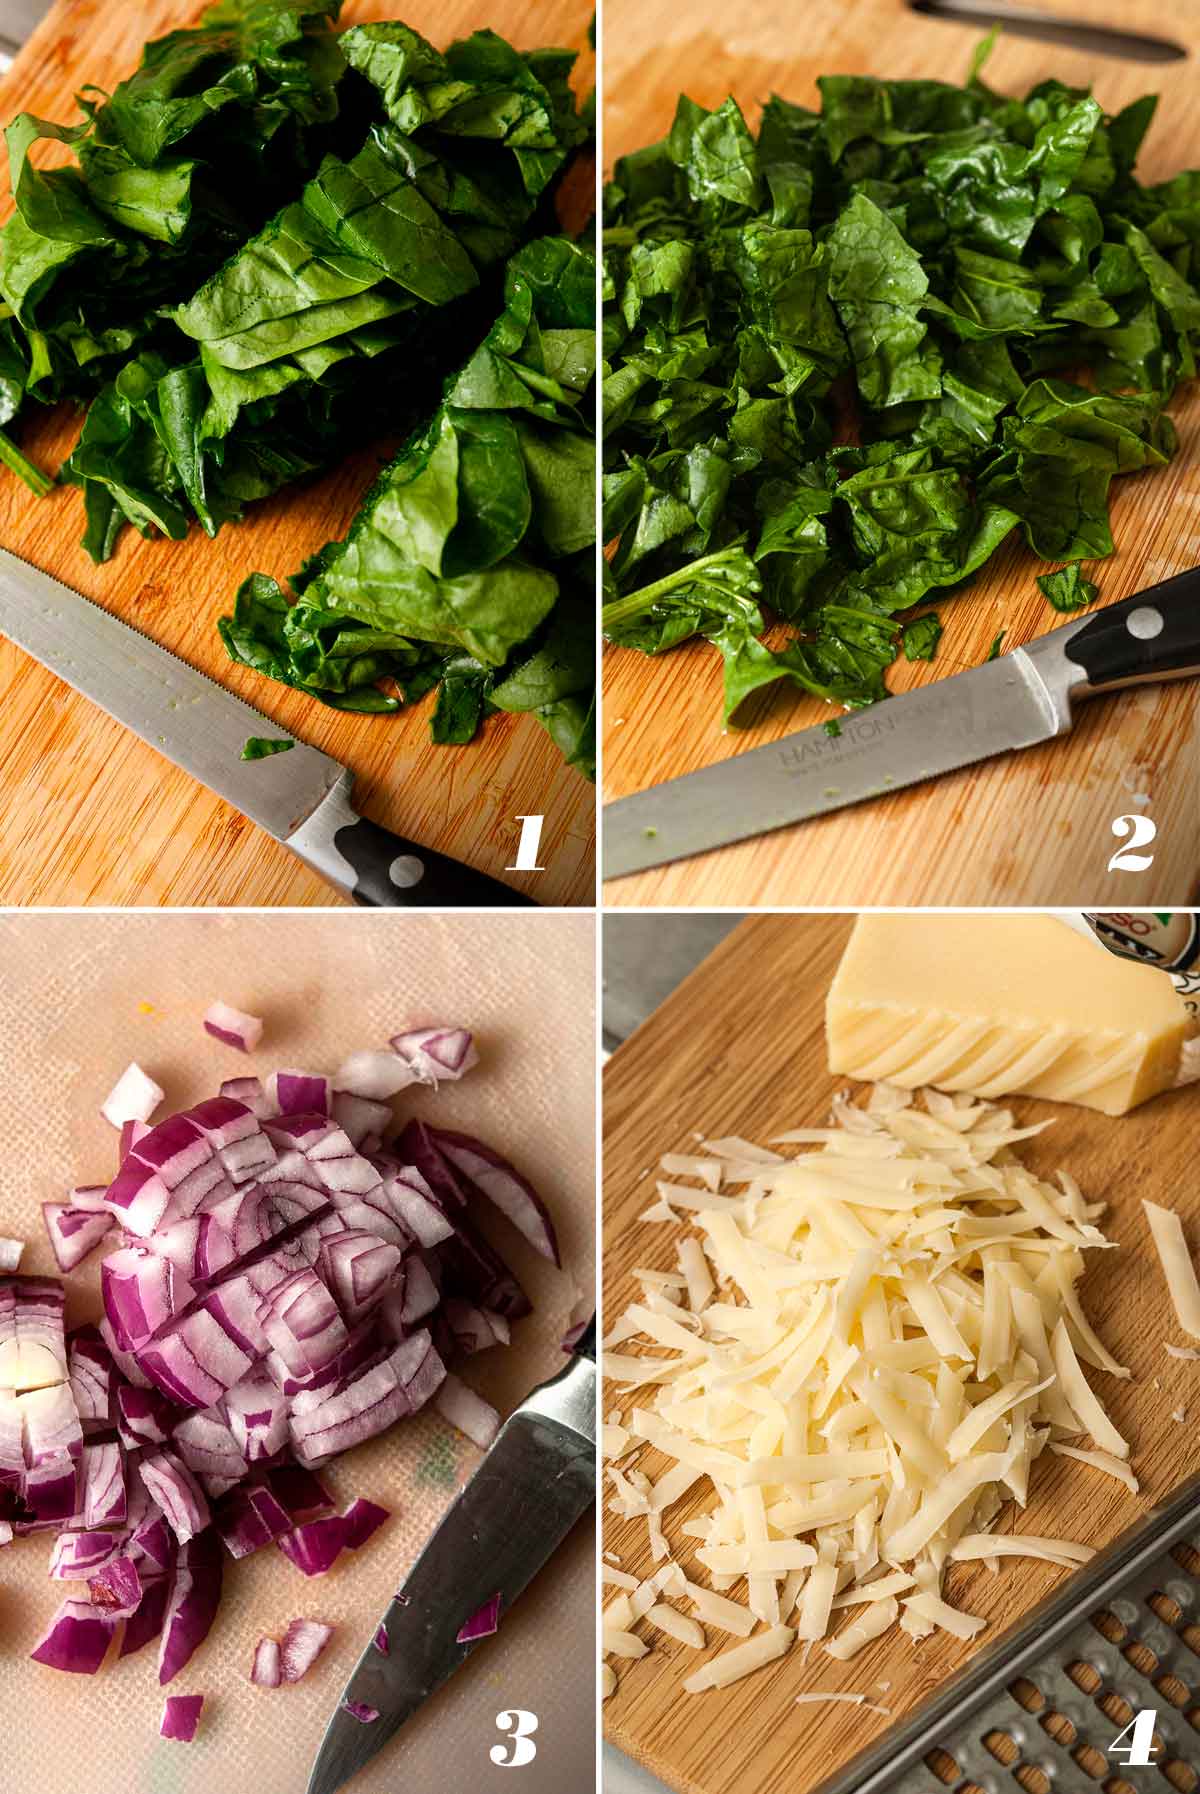 A collage of 4 numbered images showing how to prep ingredients for tuscan pasta.